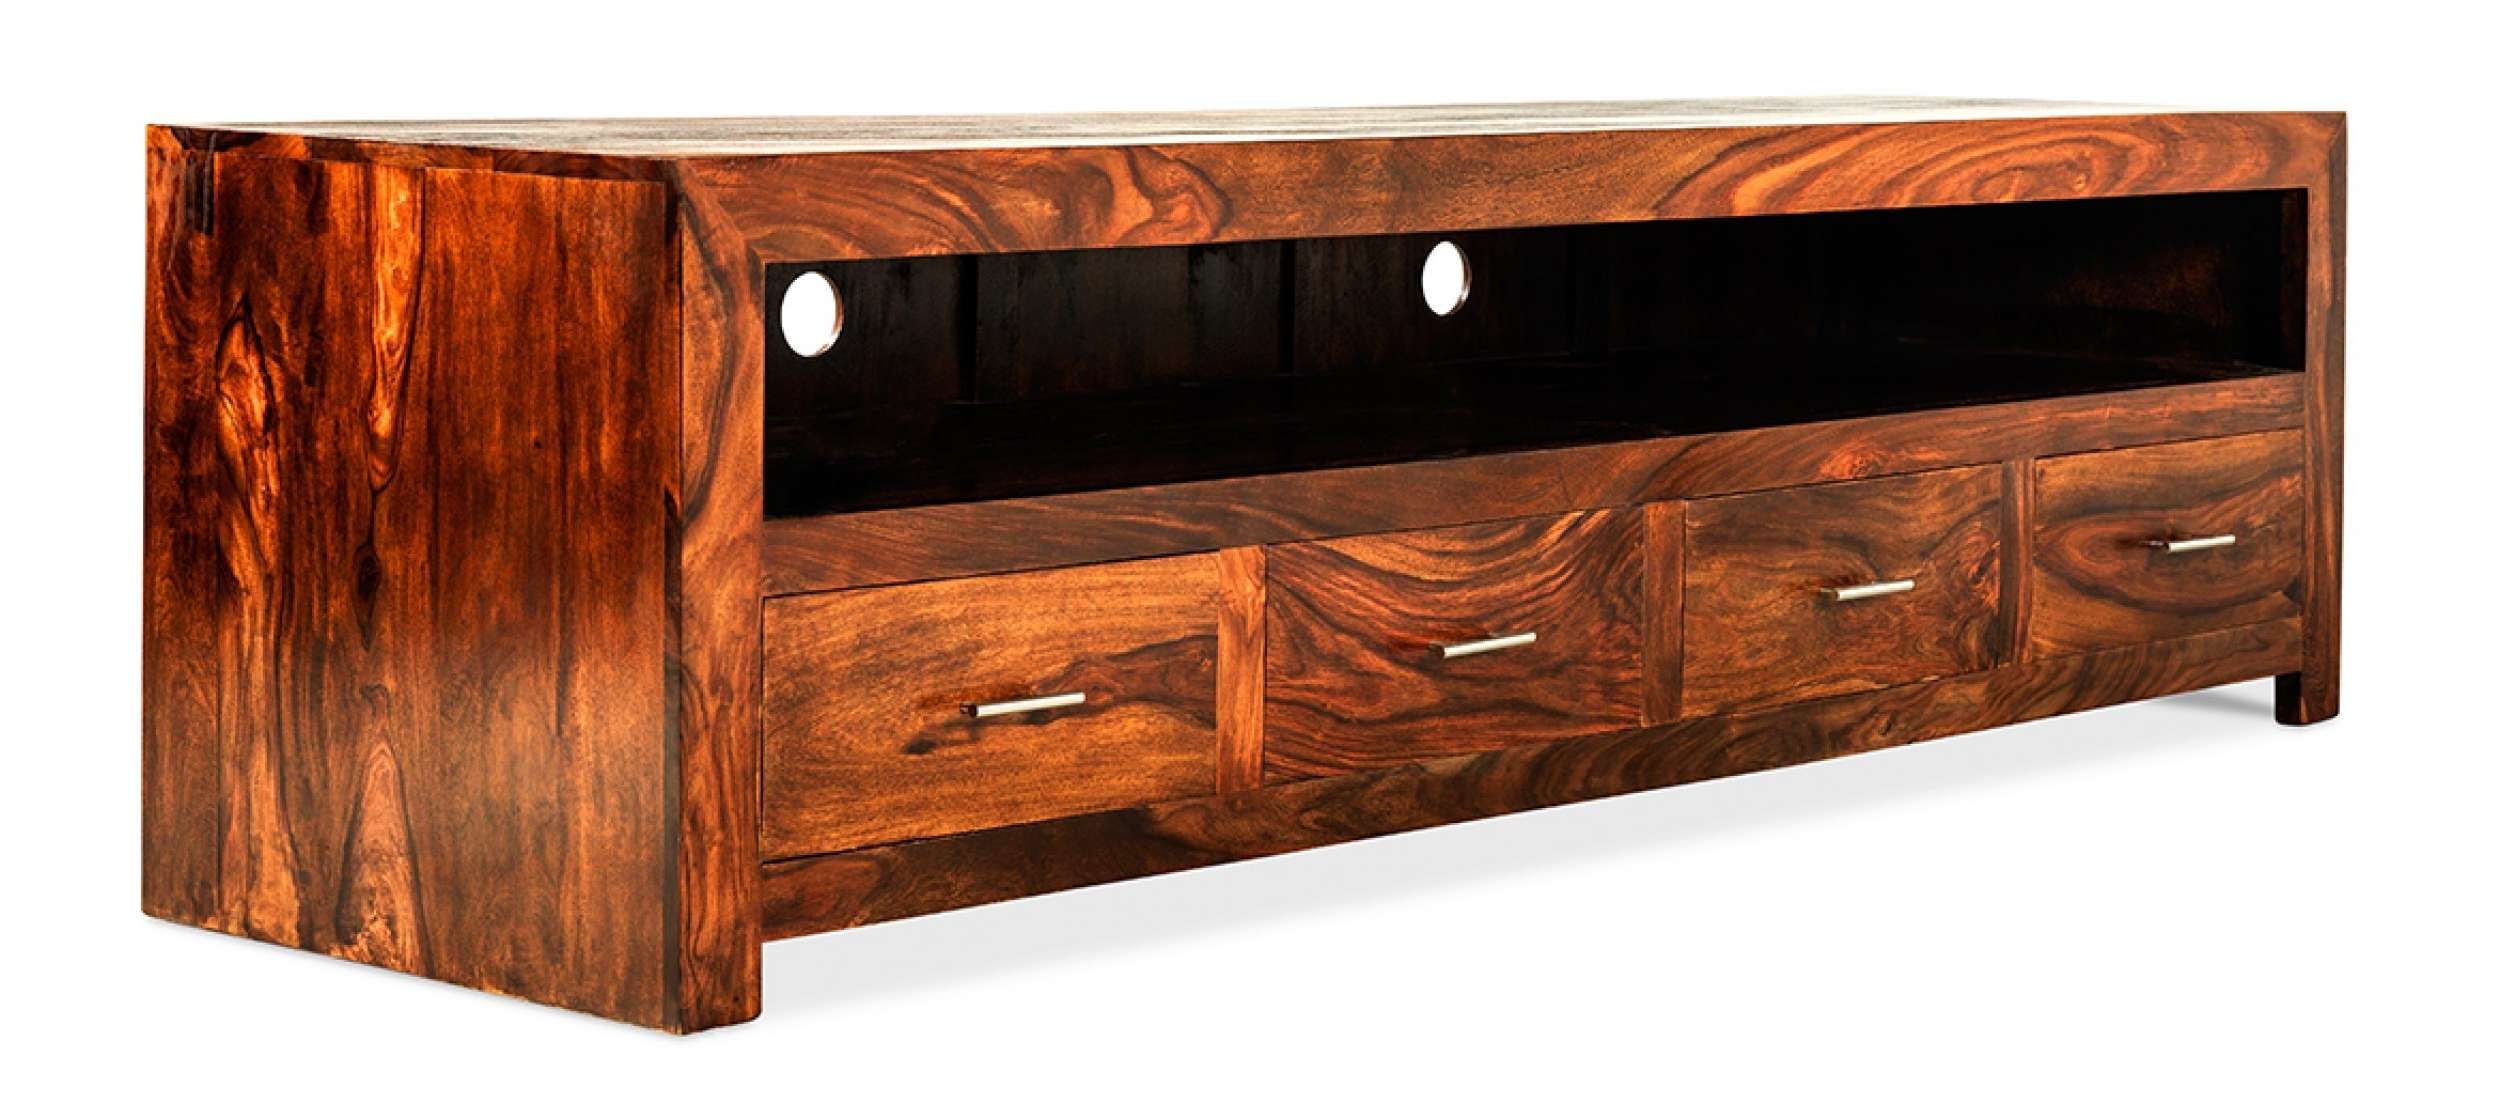 Cube Sheesham Long Plasma Tv Cabinet | Quercus Living Inside Large Tv Cabinets (Gallery 19 of 20)